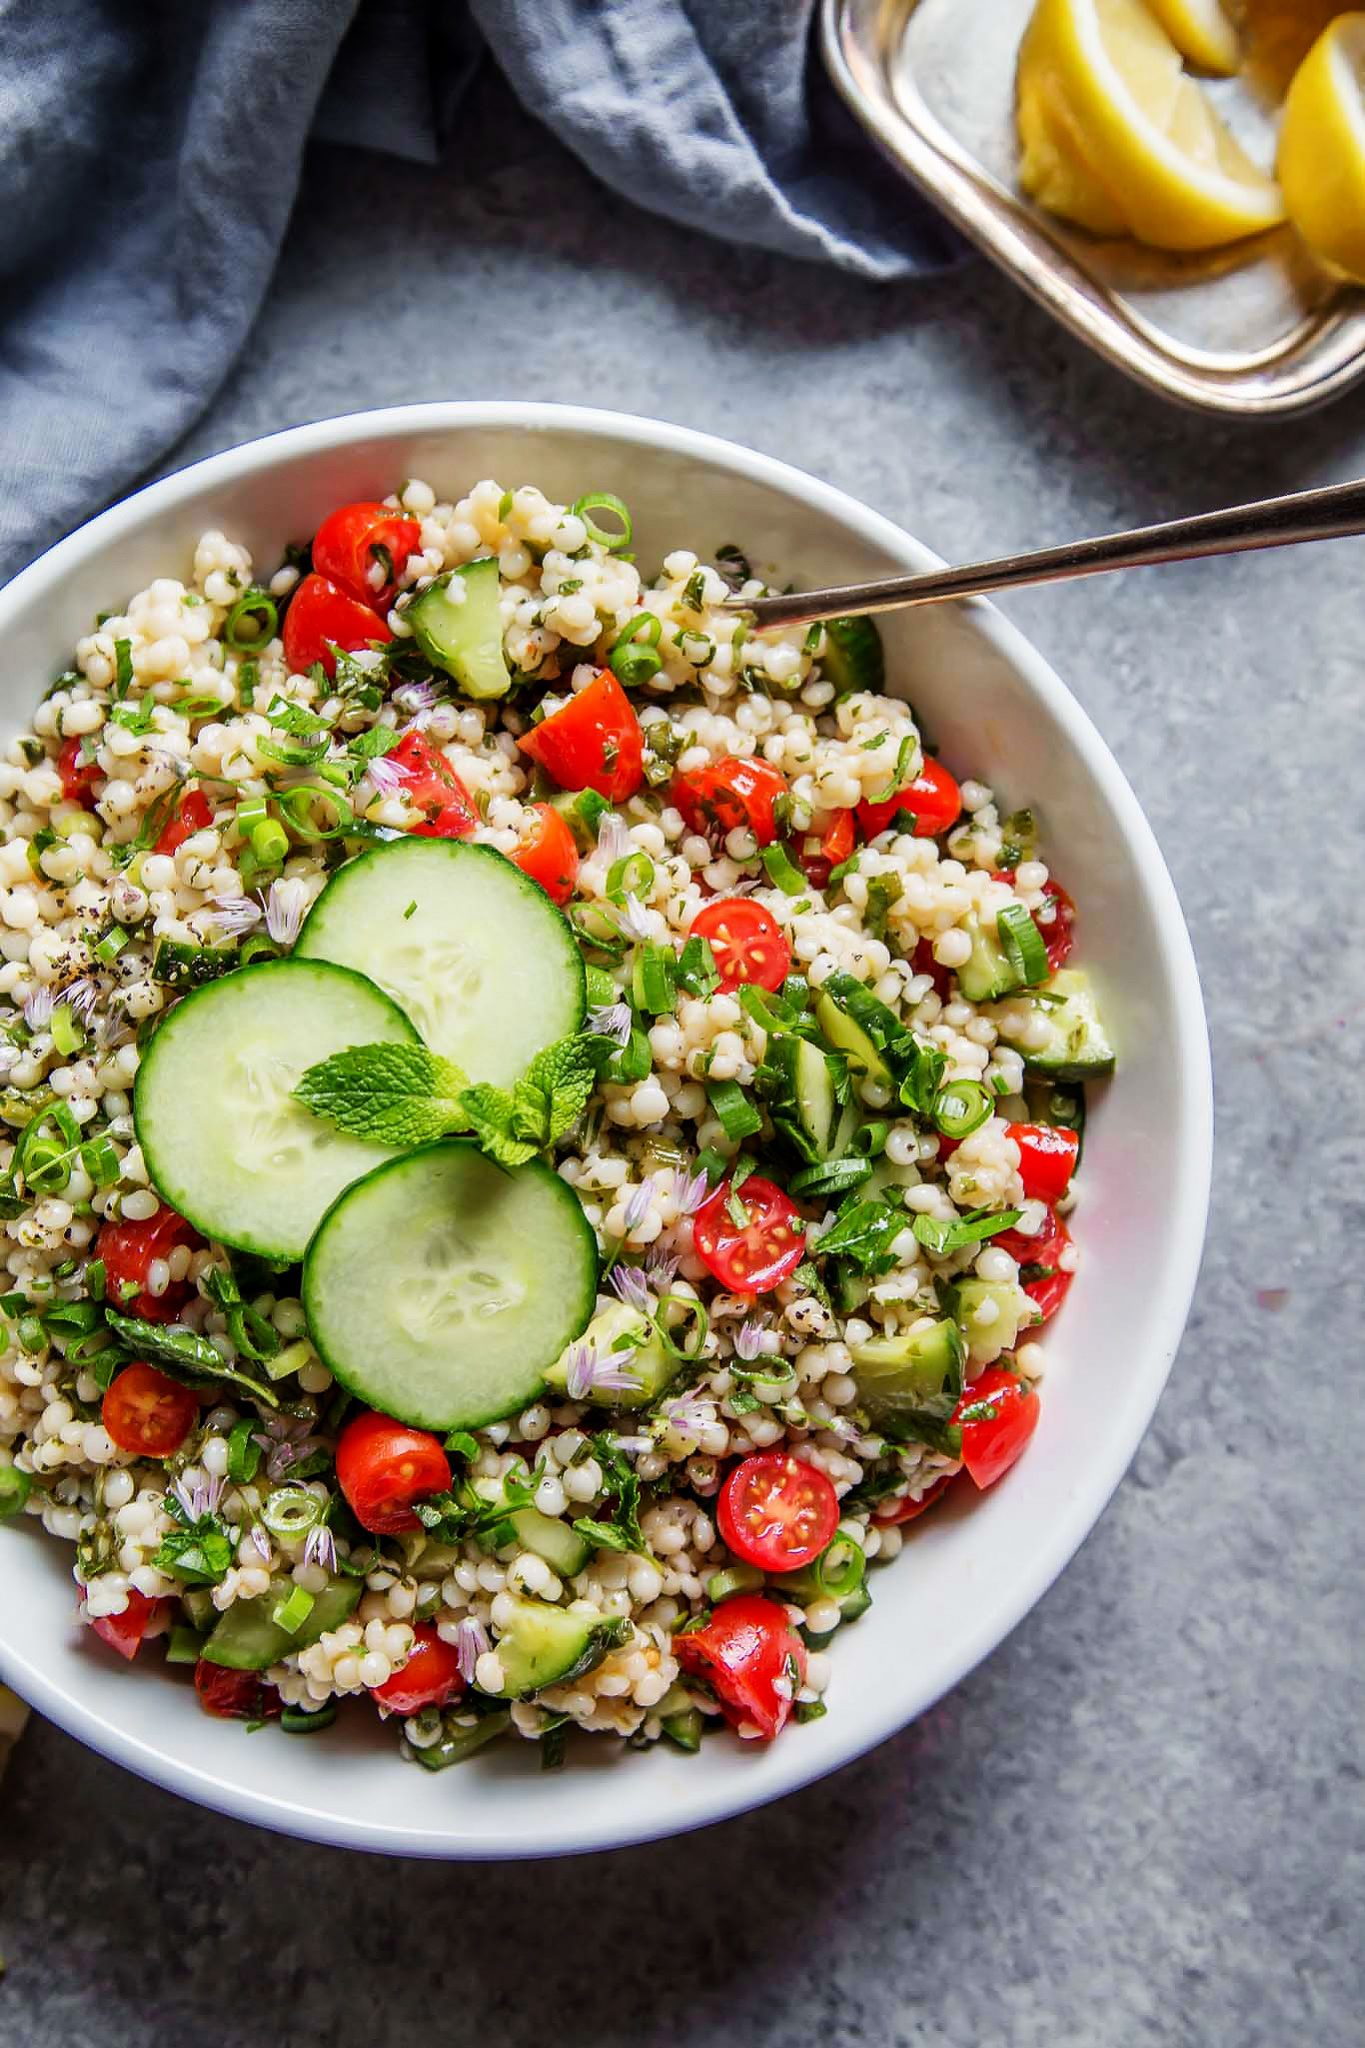 This Israeli Couscous Tabbouleh Salad recipe combines pearl couscous with tomatoes, cucumber, fresh herbs and a light citrus dressing. It's a perfect make-ahead salad recipe! | platingsandpairings.com